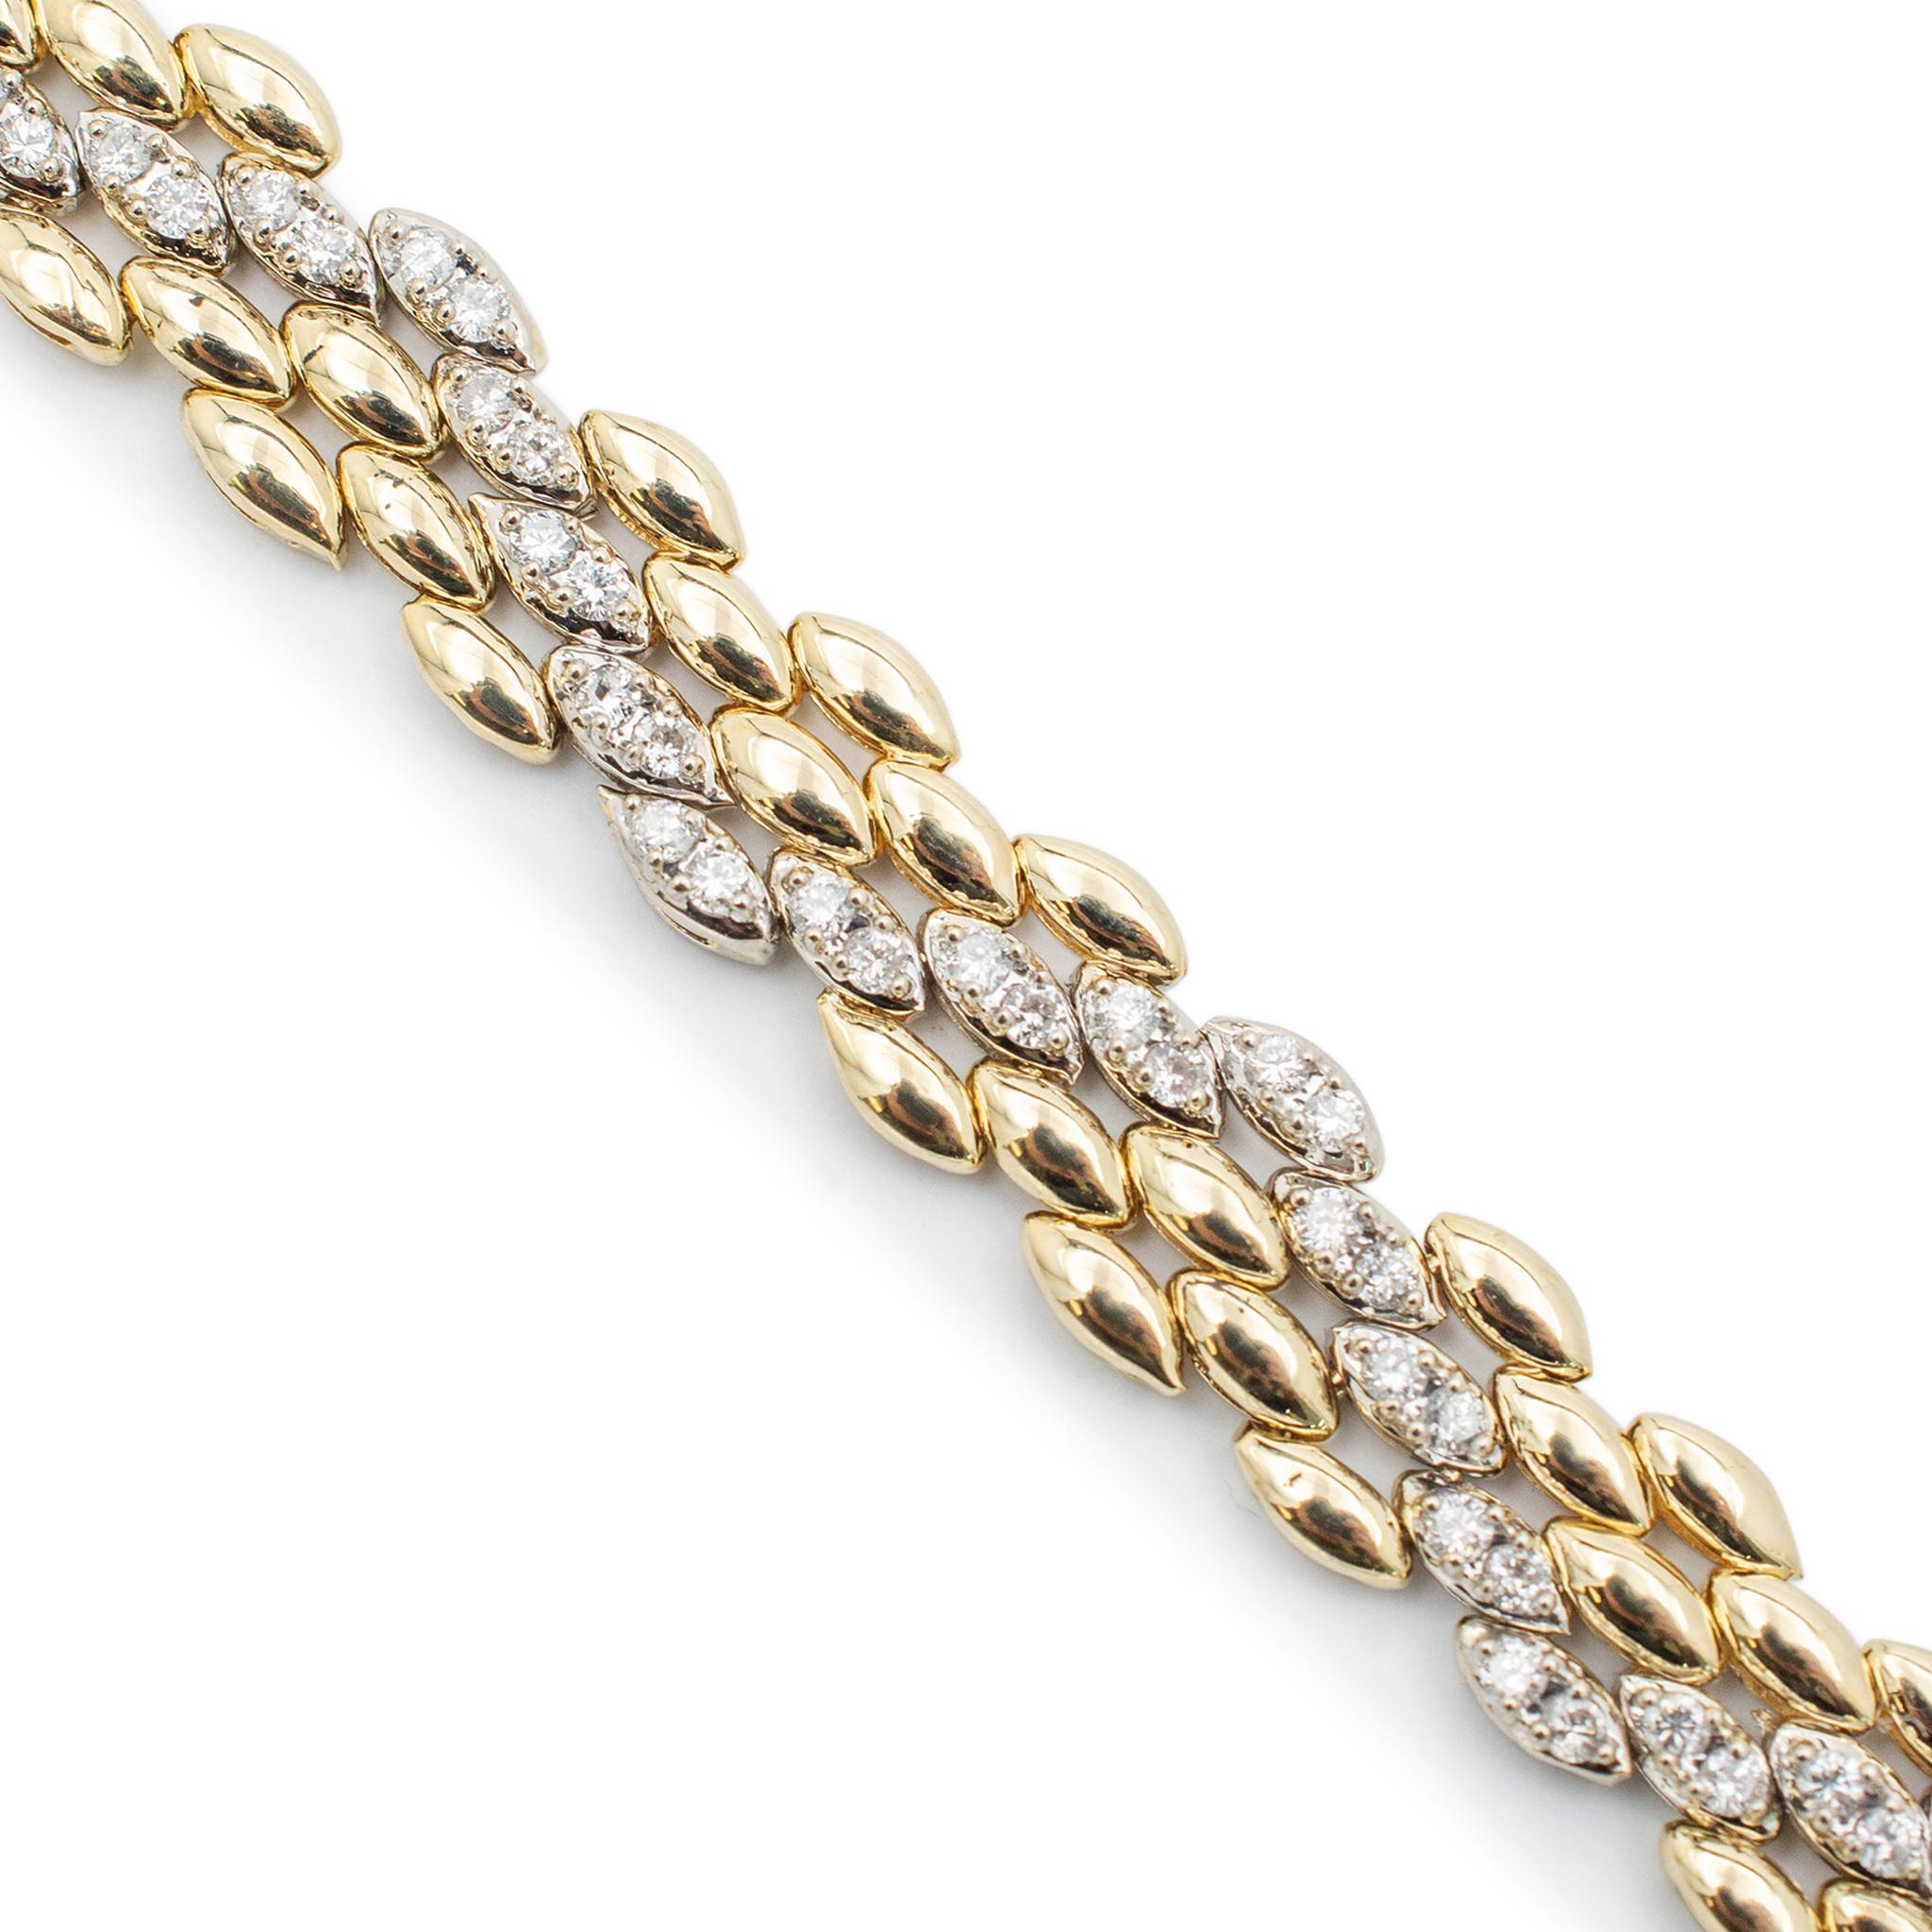 Gender: Unisex

Material: 14K Yellow & White Gold

Length: 7.00 inches

Width: 8.45mm

Weight: 16.30 grams

Custom made polished 14K white & yellow gold, diamond link bracelet. Engraved with 